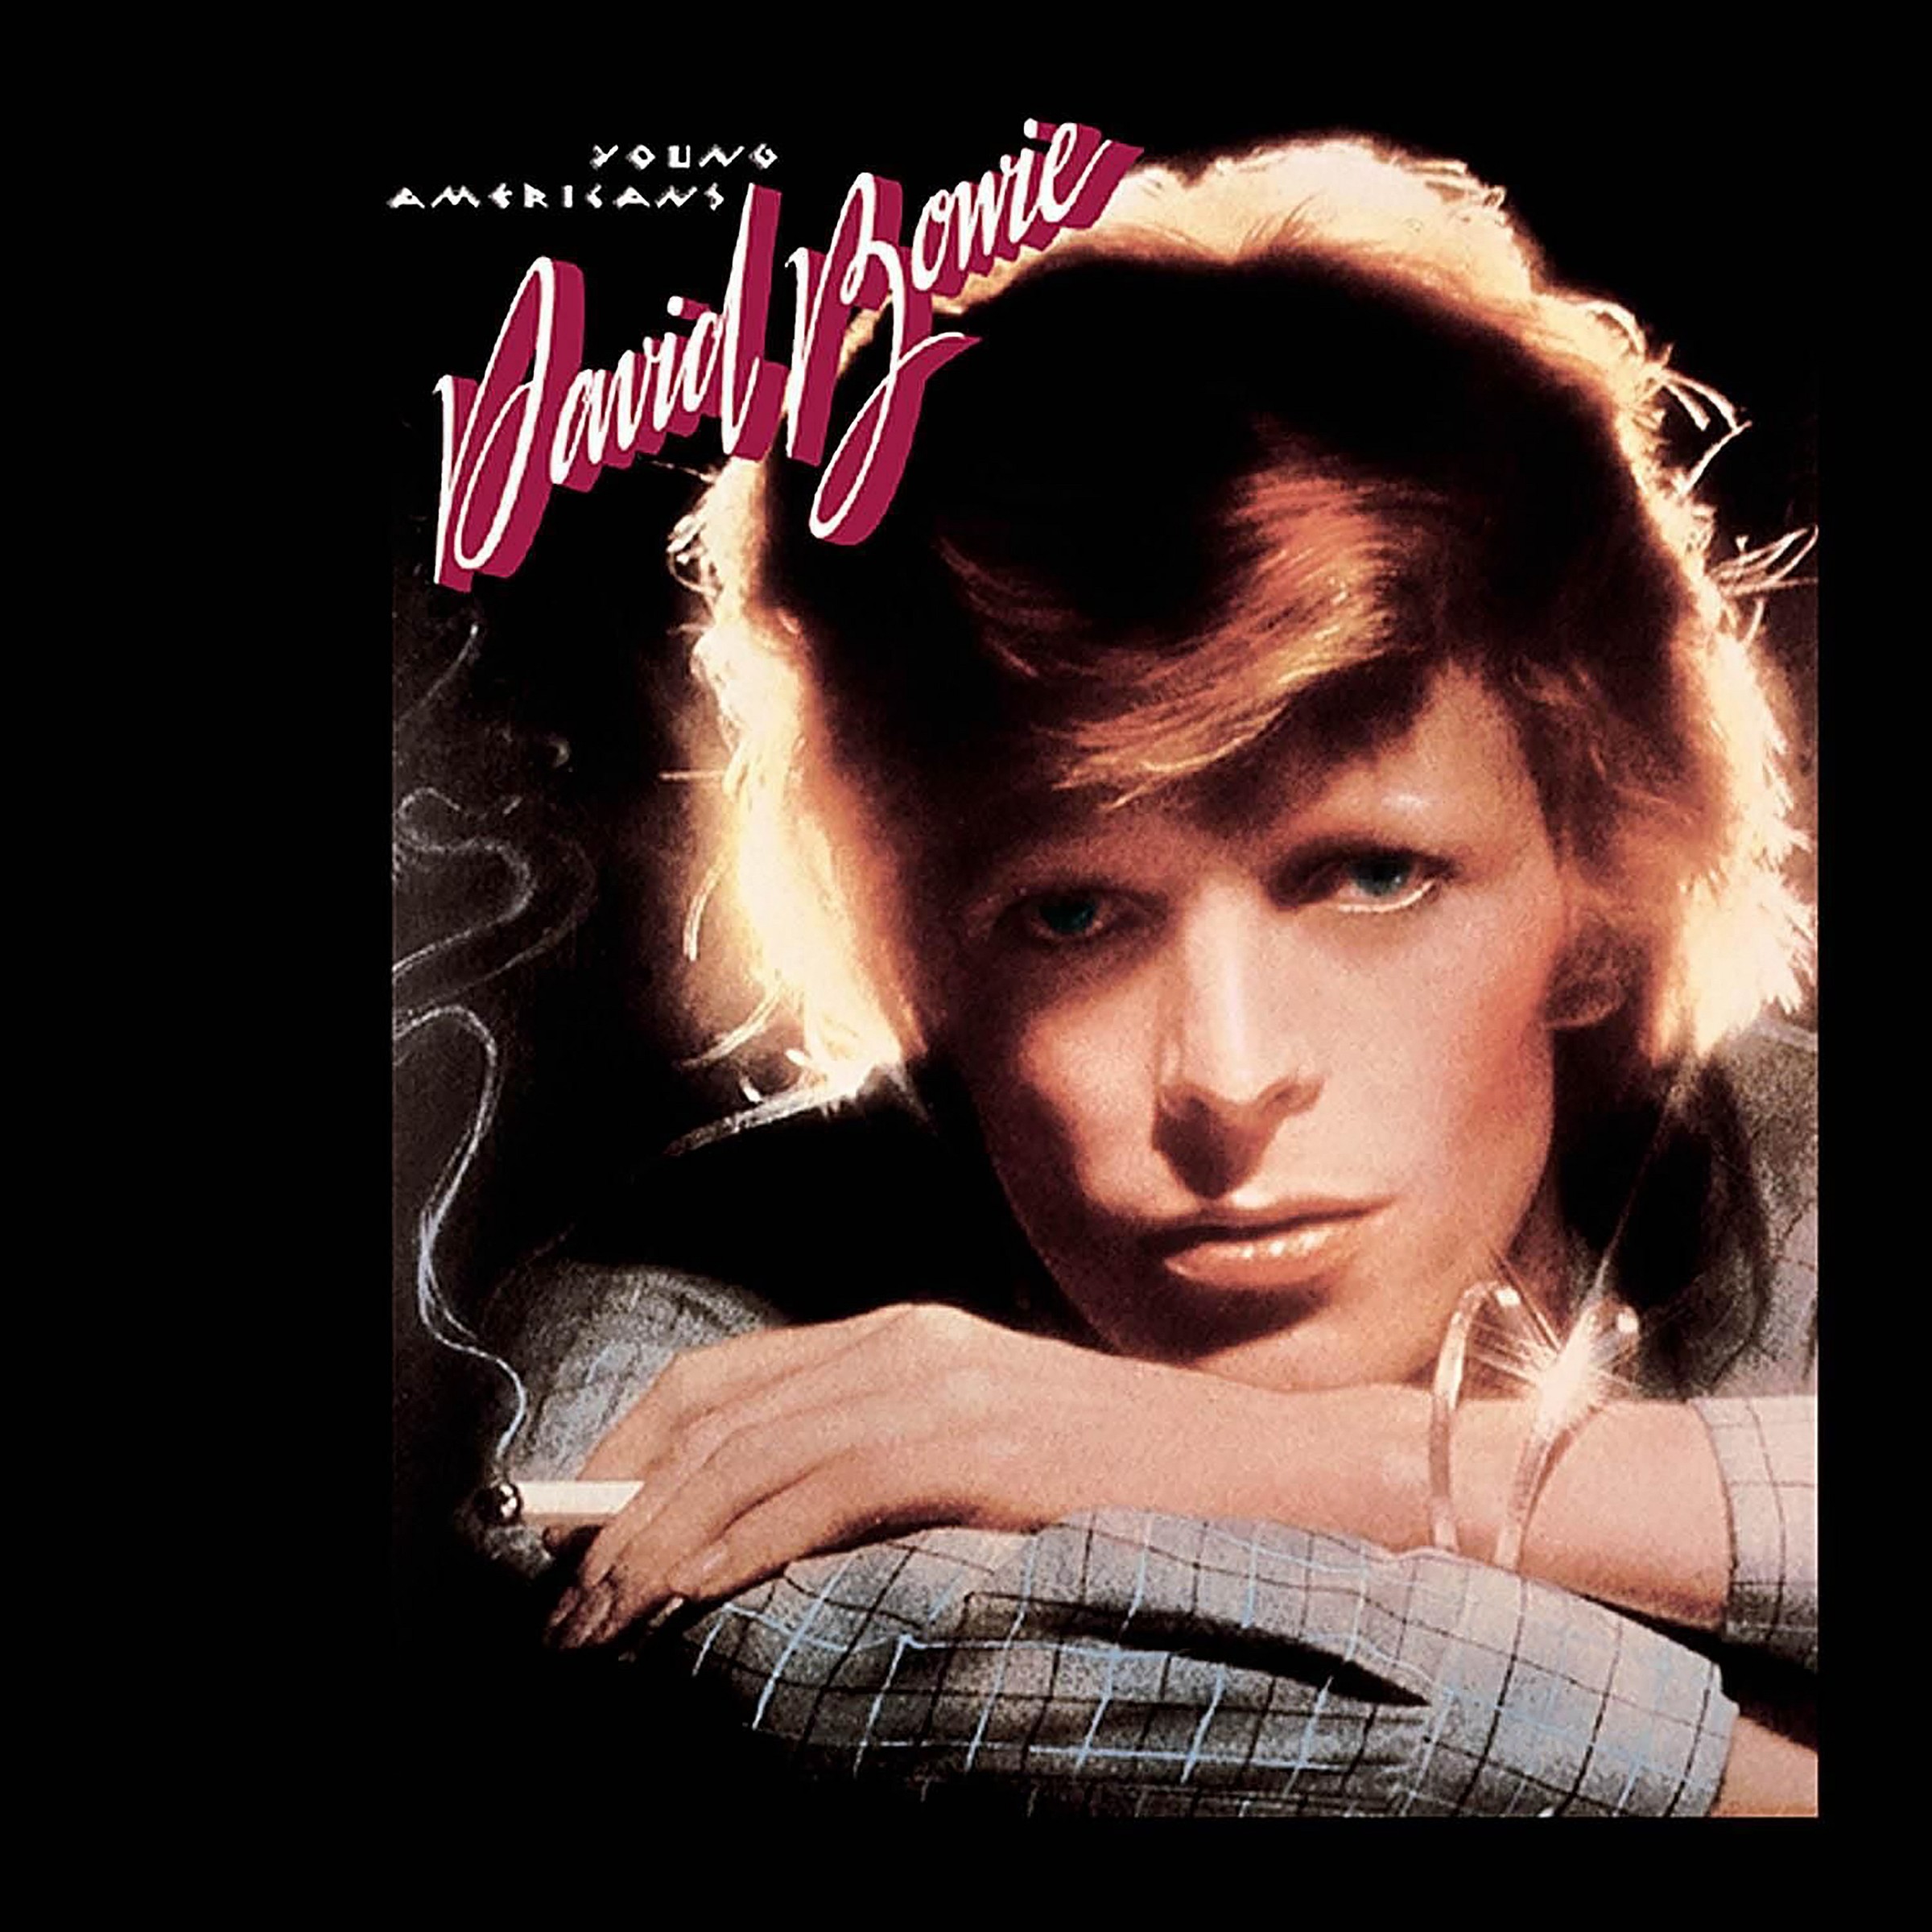 David Bowie (Young Americans) Album Cover POSTER - Lost Posters